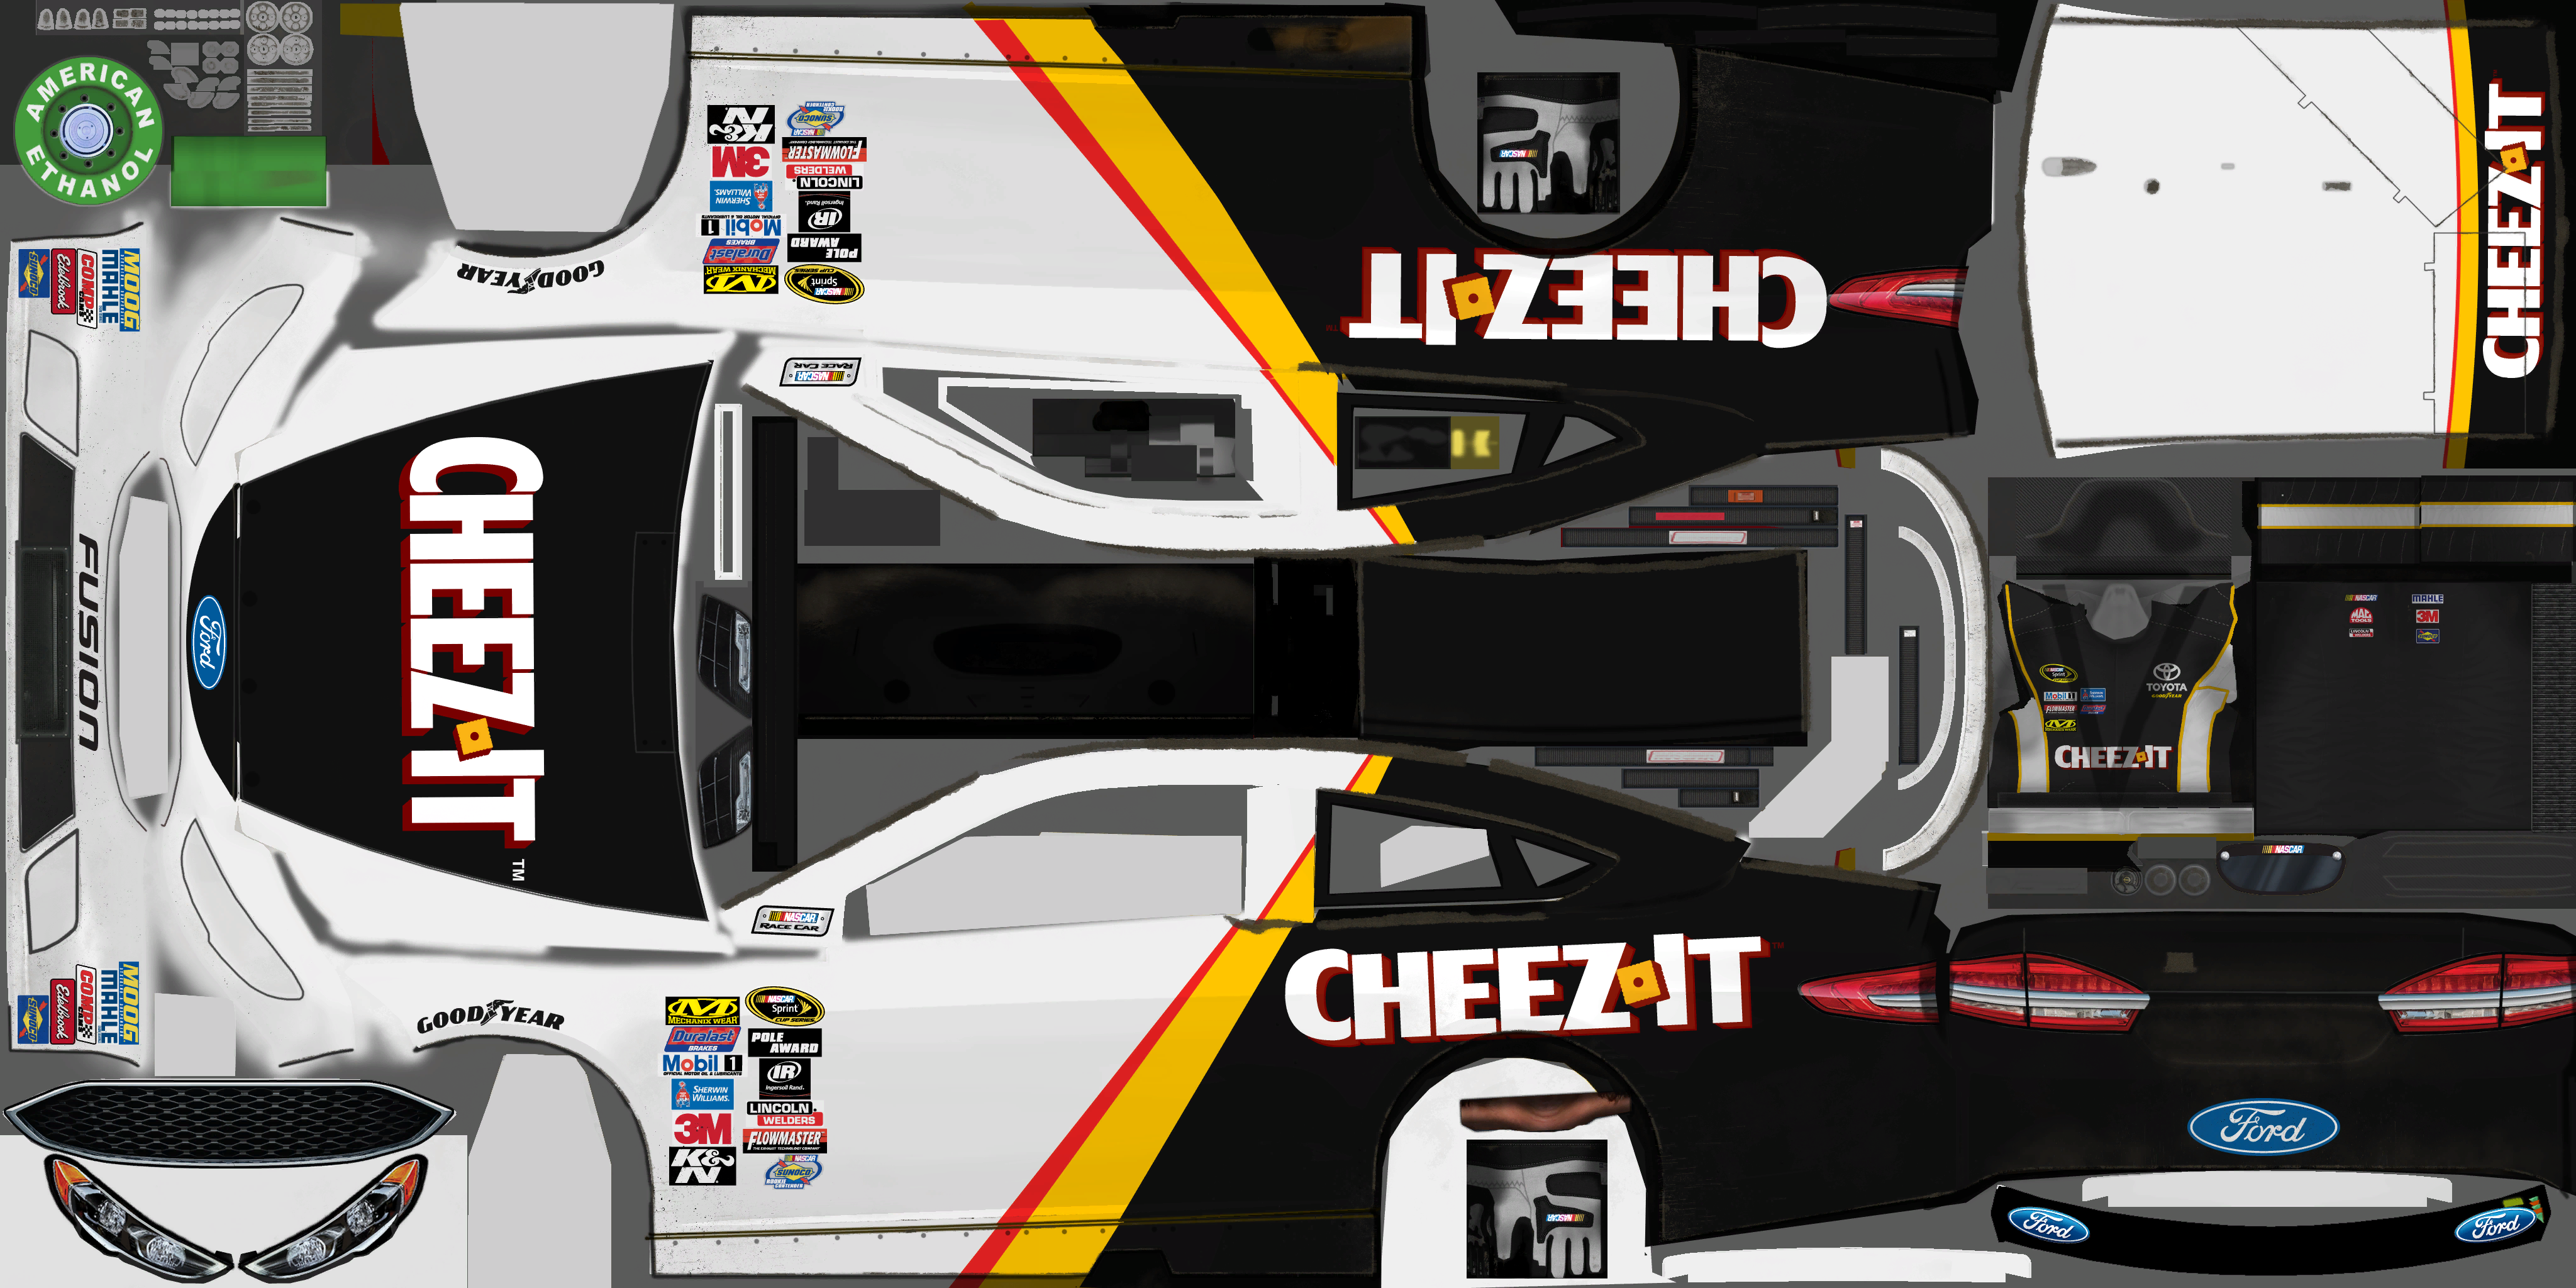 NASCAR Heat Evolution - Contract 4: Cheez-It Ford